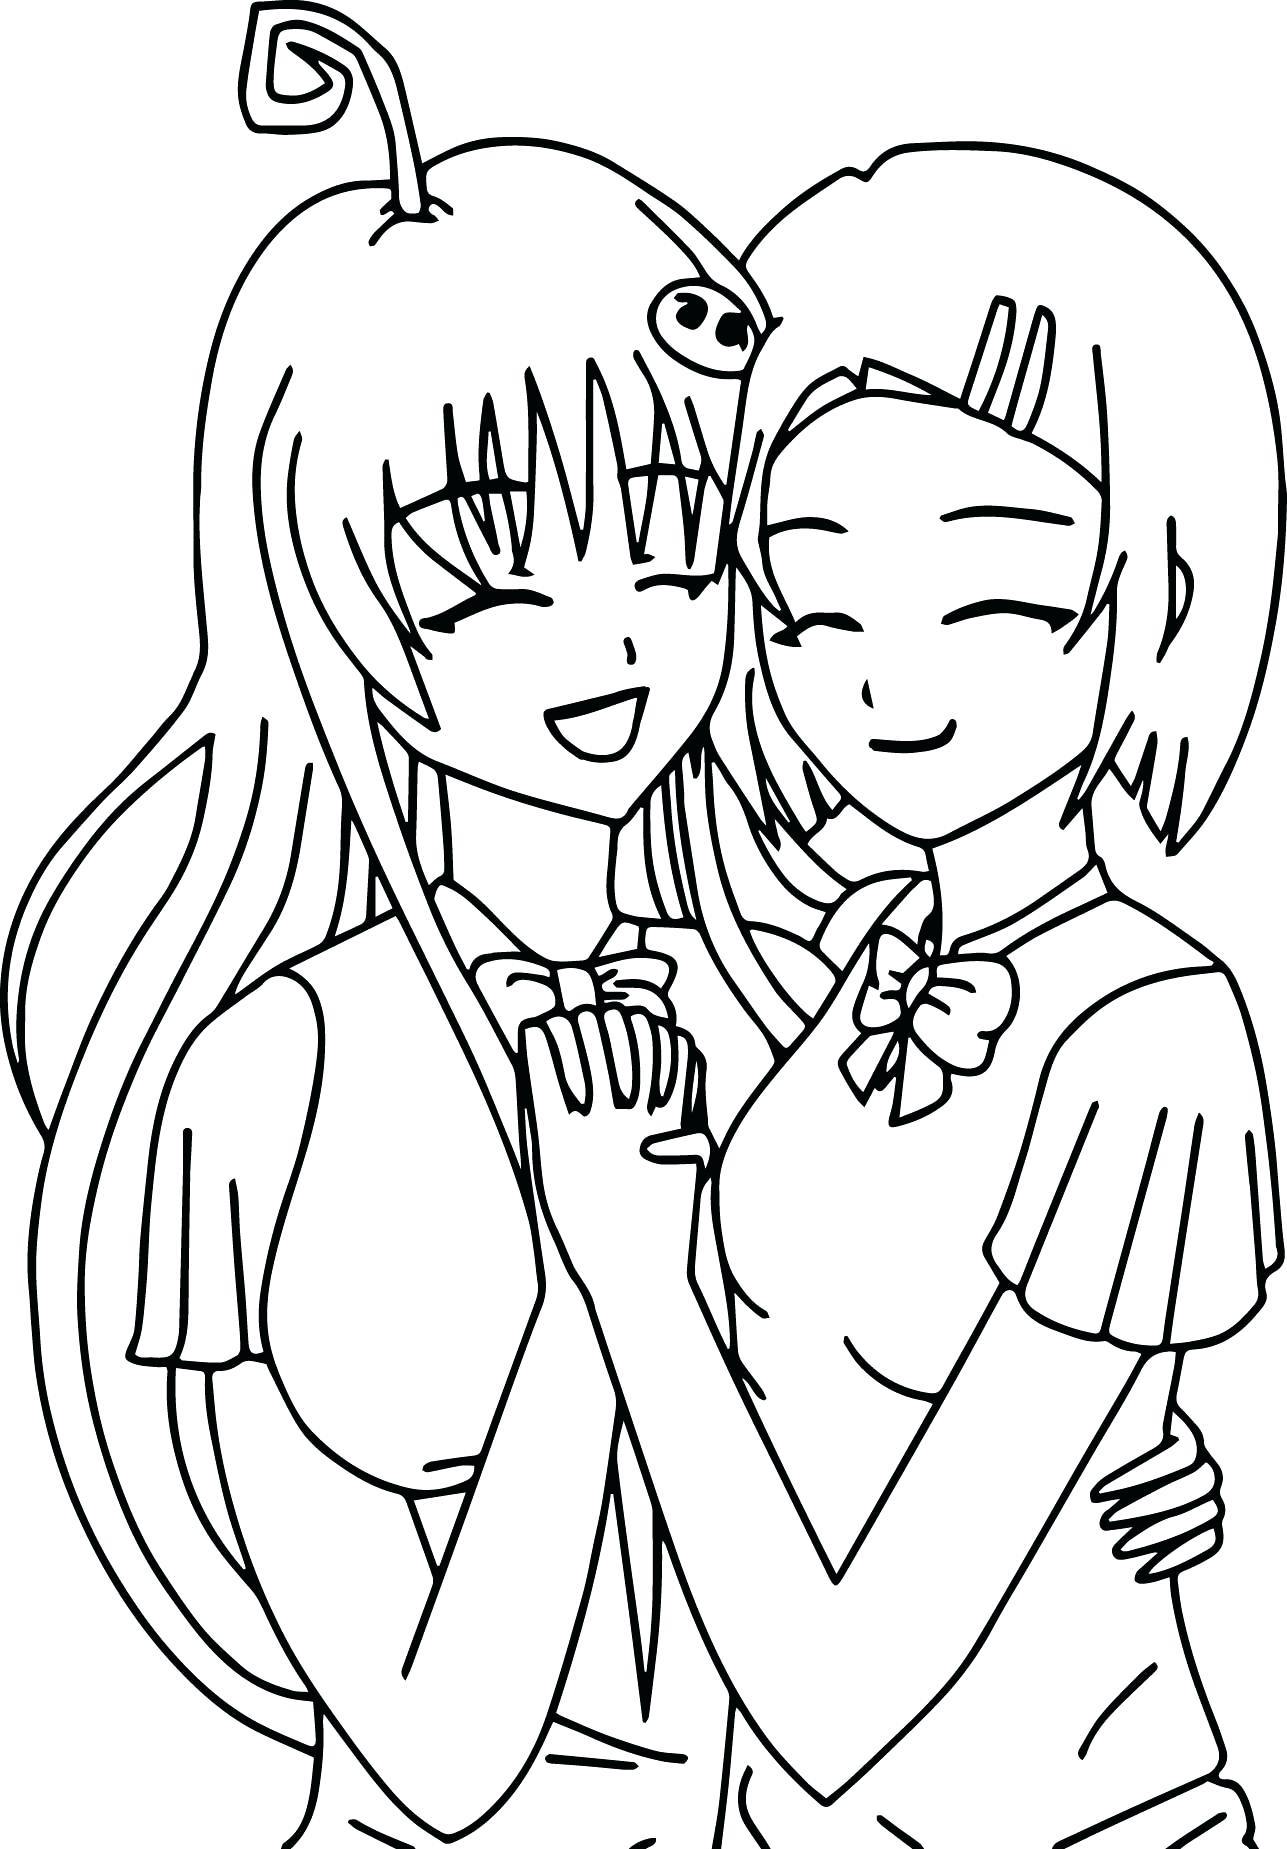 Best Friend Coloring Pages For Girls at Free